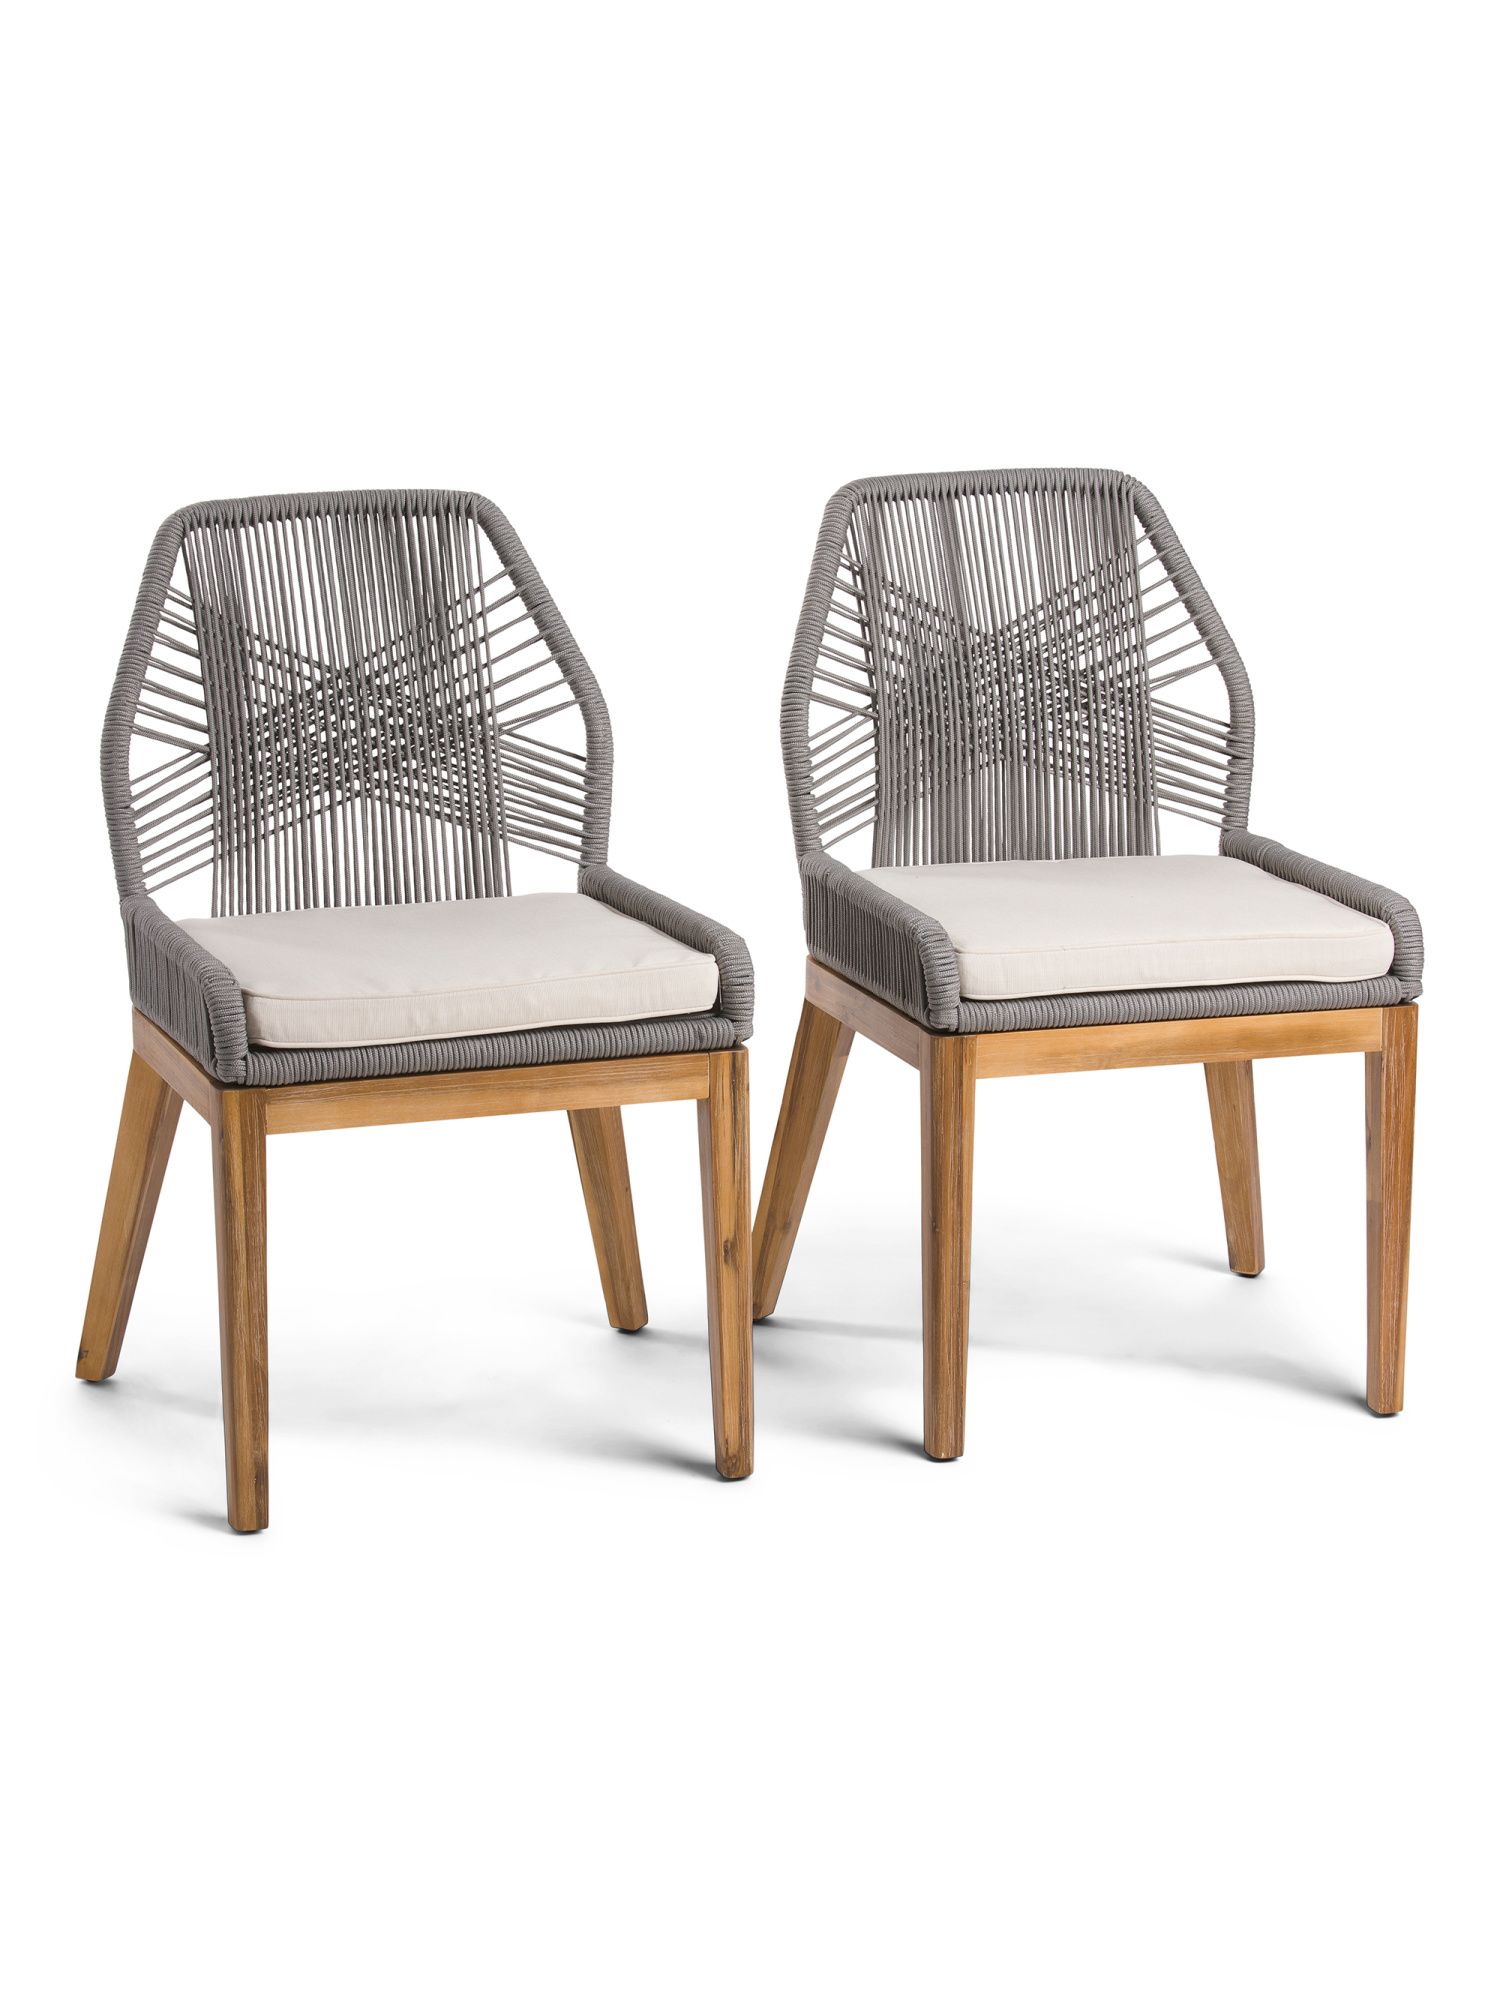 Set Of 2 Rope Side Chairs With Cushions | Kitchen & Dining Room | Marshalls | Marshalls